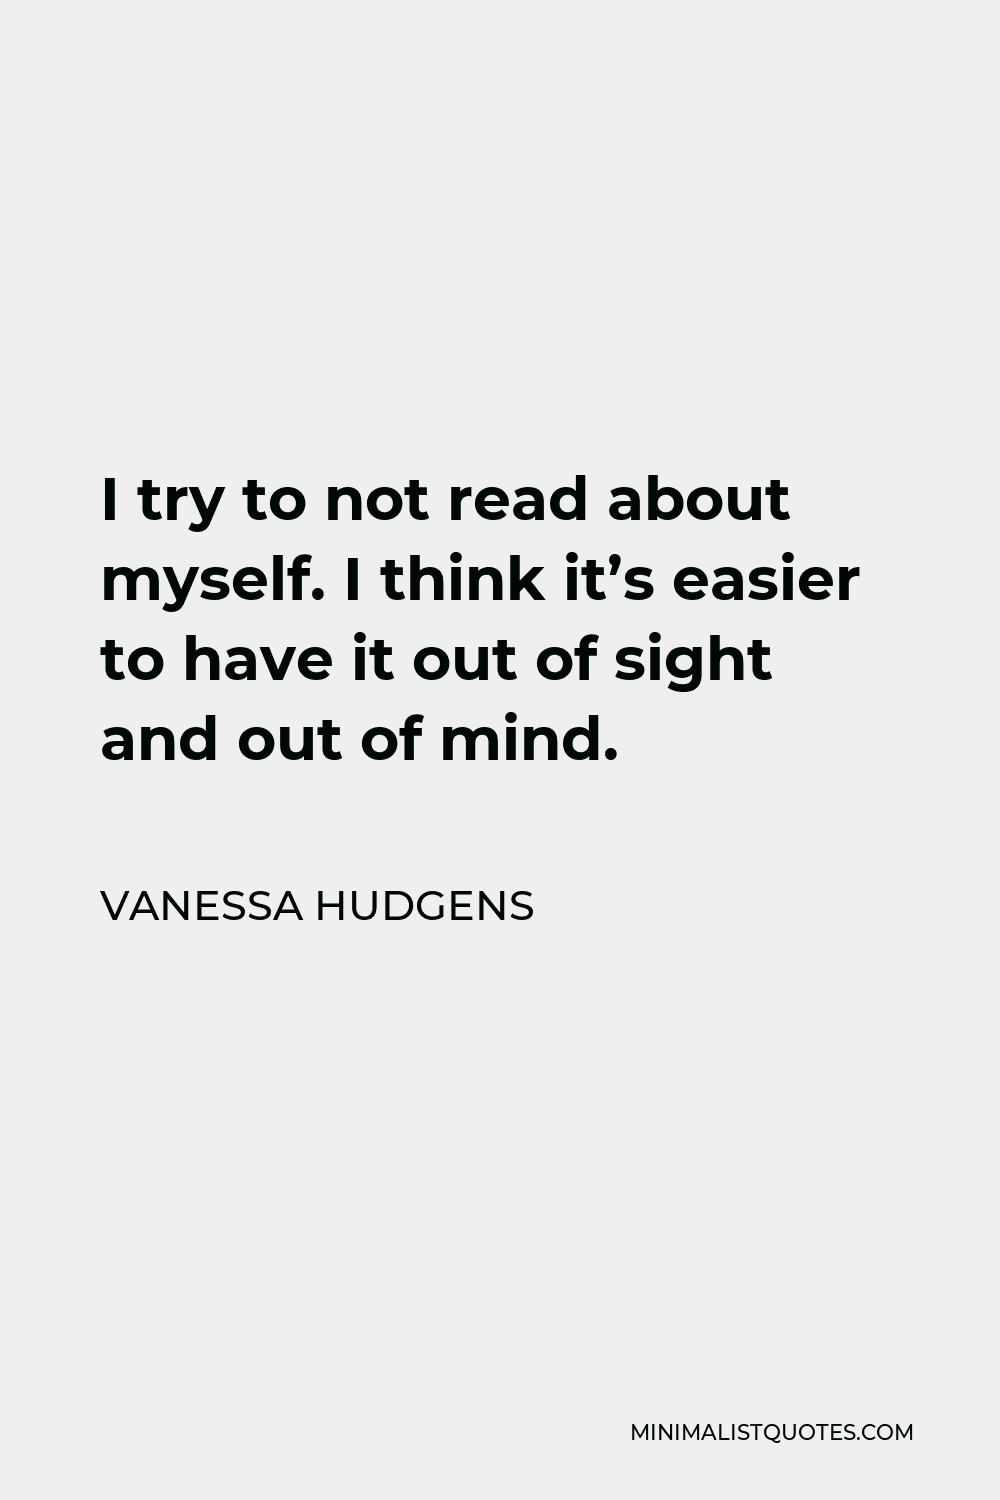 Vanessa Hudgens Quote - I try to not read about myself. I think it’s easier to have it out of sight and out of mind.